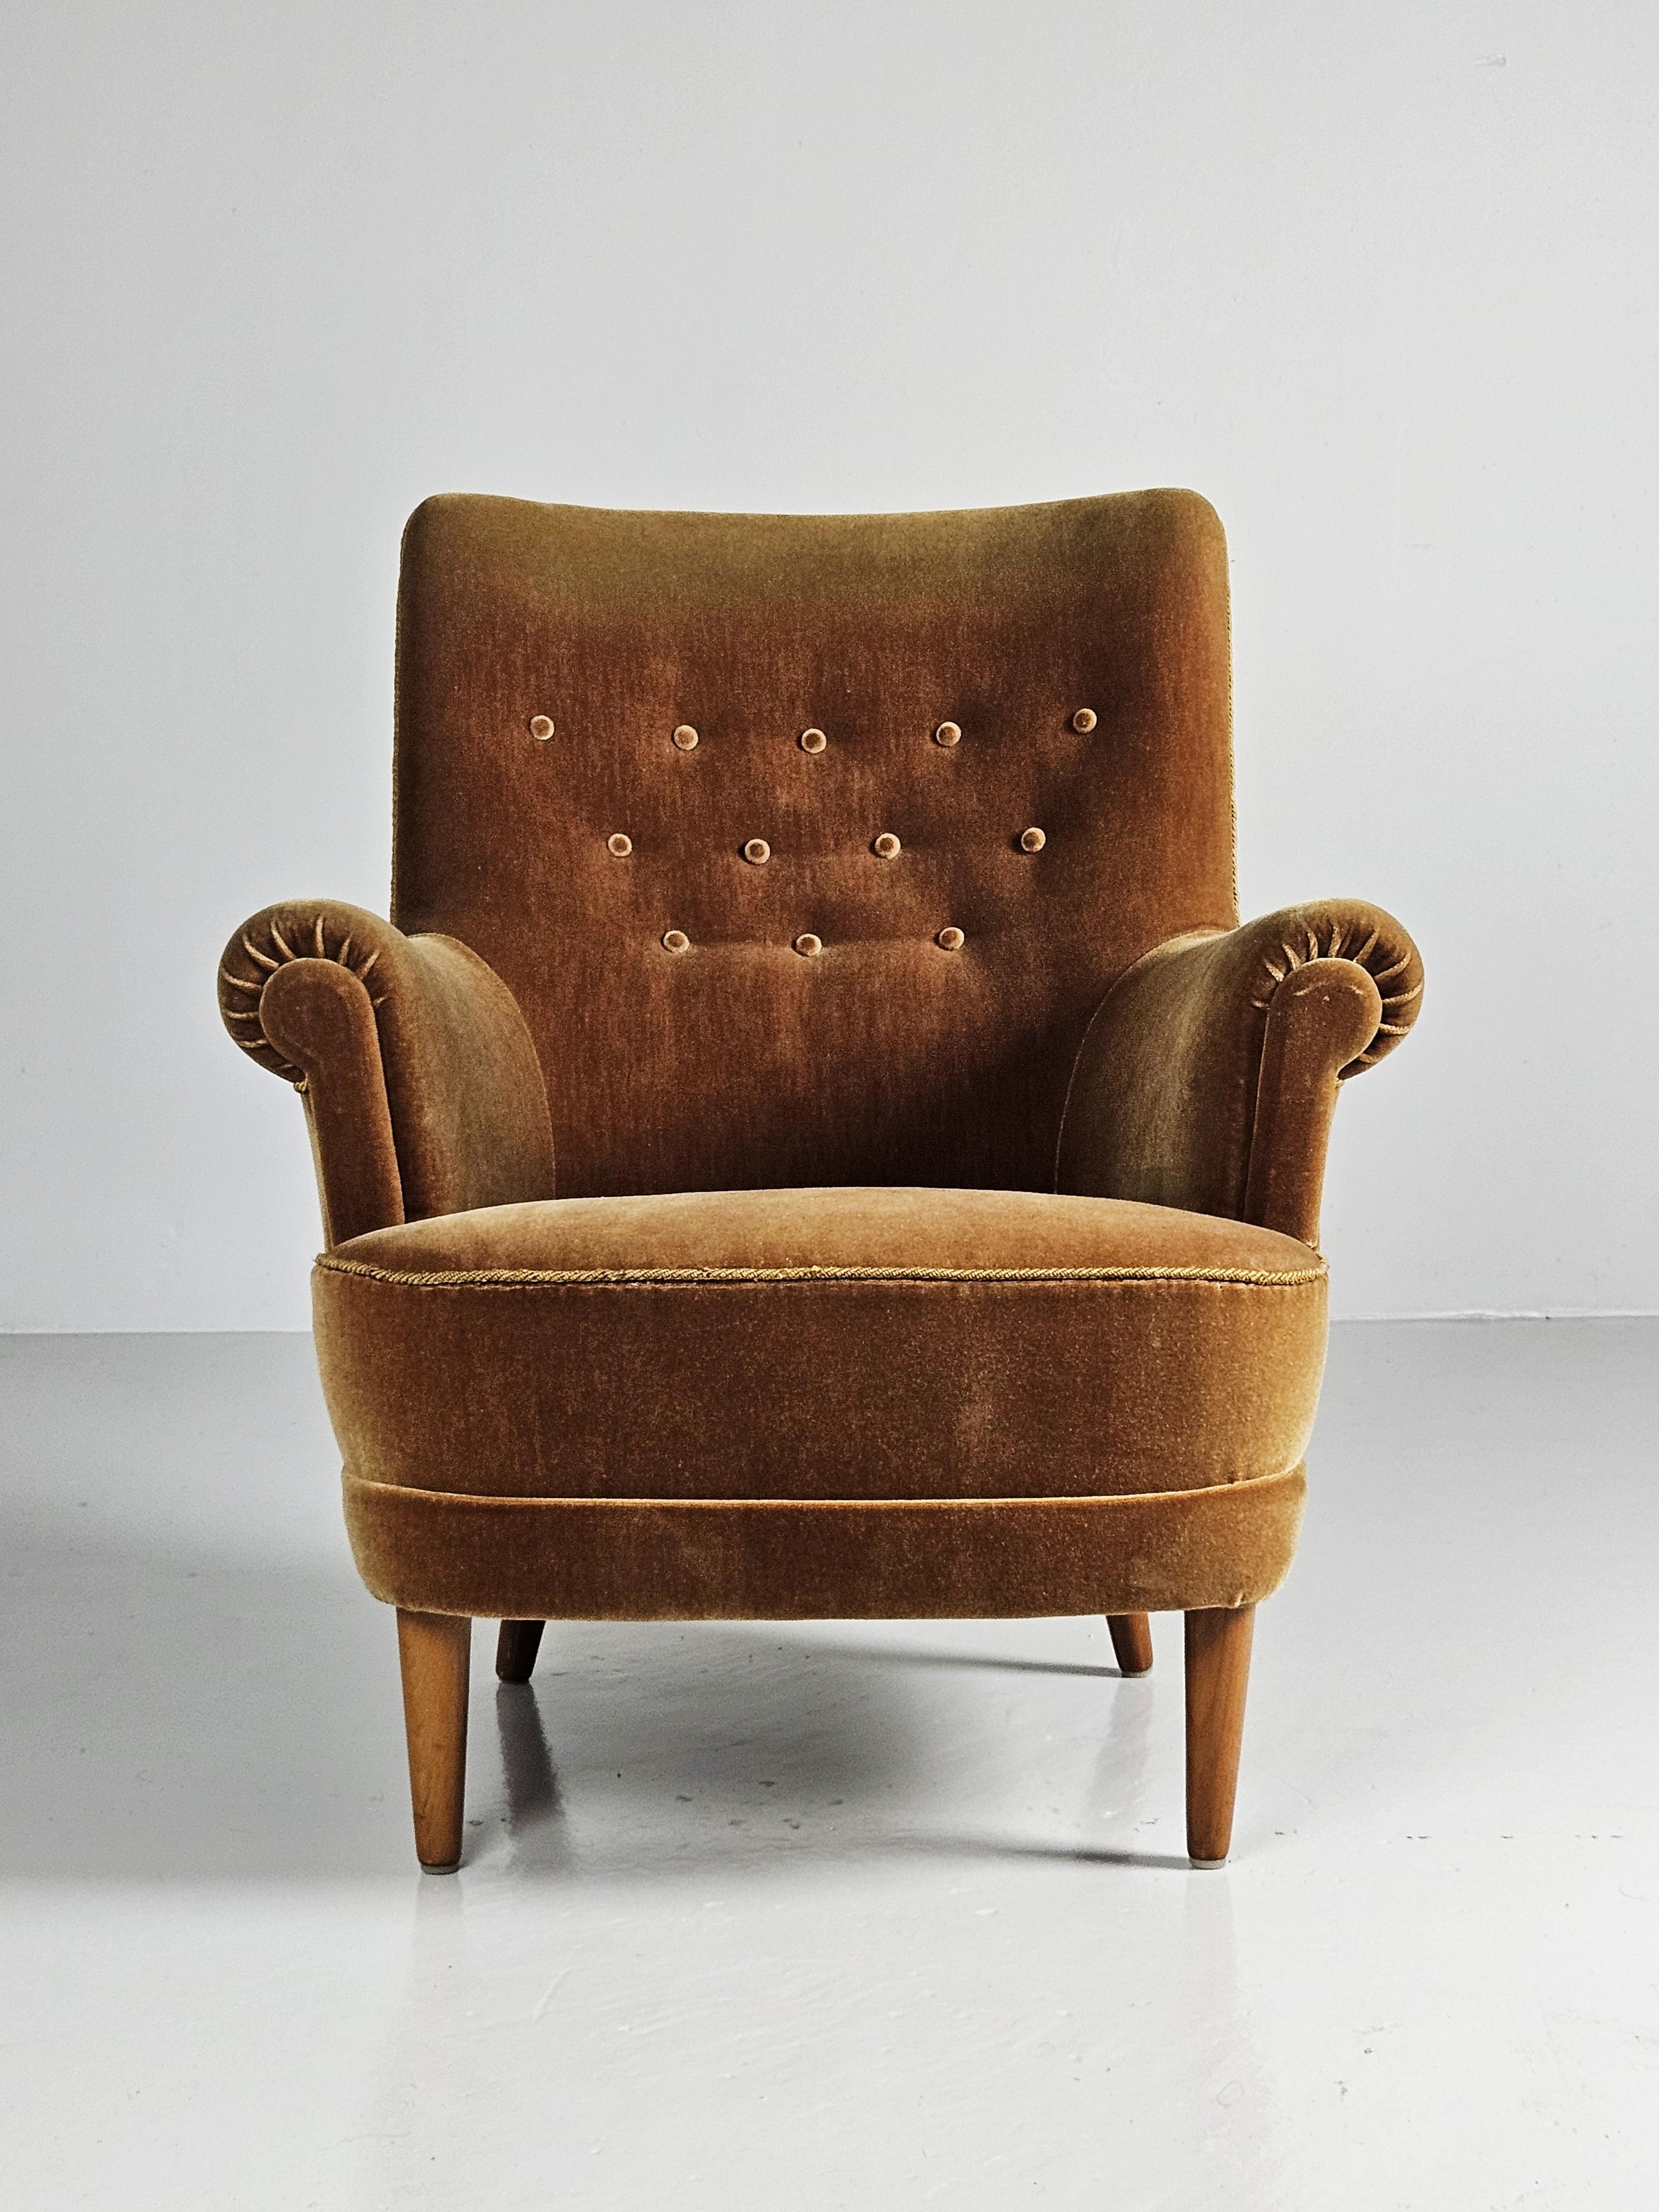 Great lounge chair by Carl Malmsten. Model is 'Hemmakväll' and was designed in the 1940s. 

Original fabric in good condition. 

